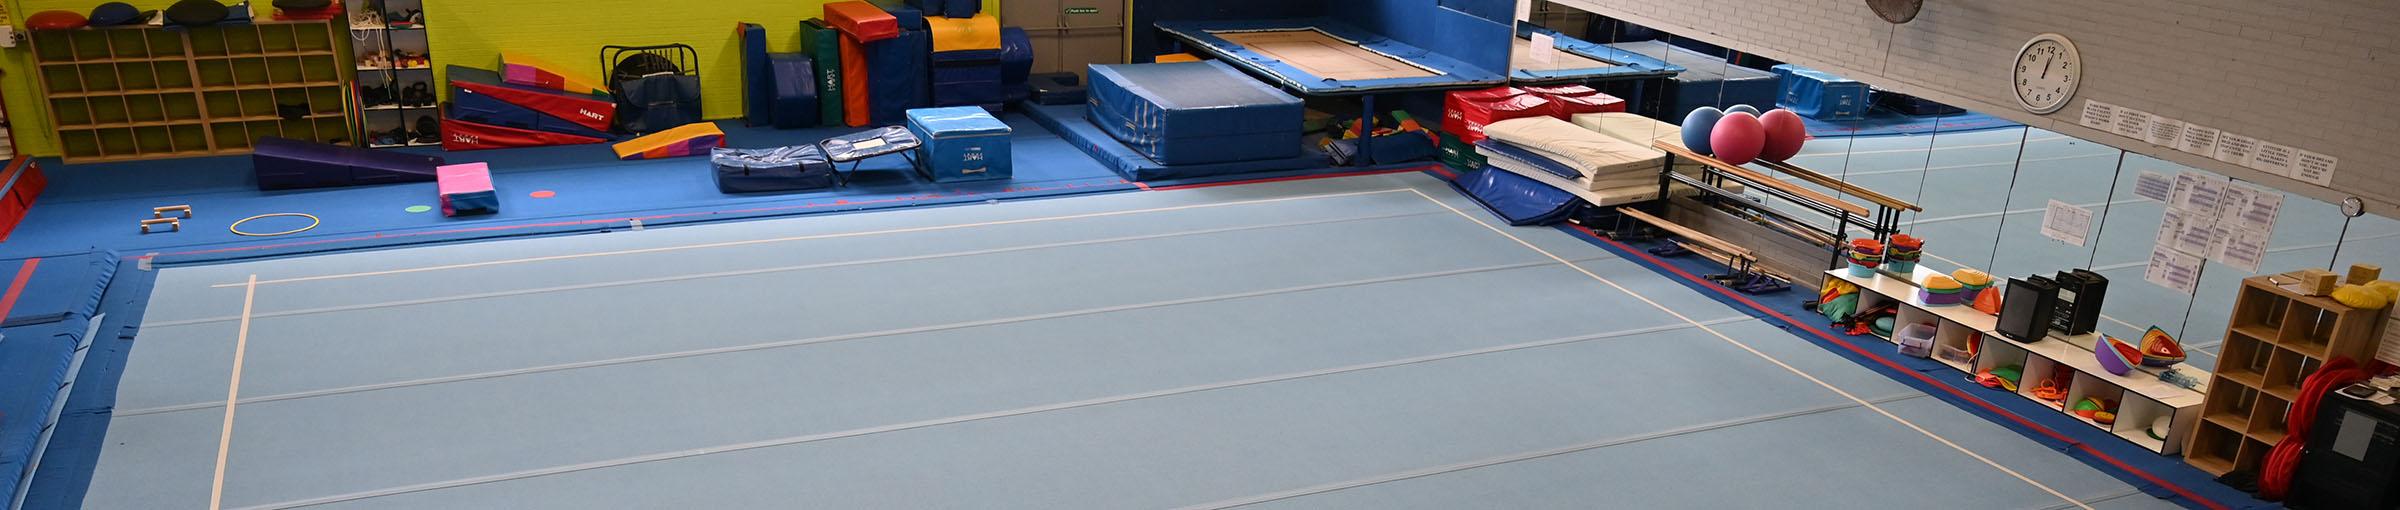 Soft floor of gymnasium surrounded by mirrors and equipment.